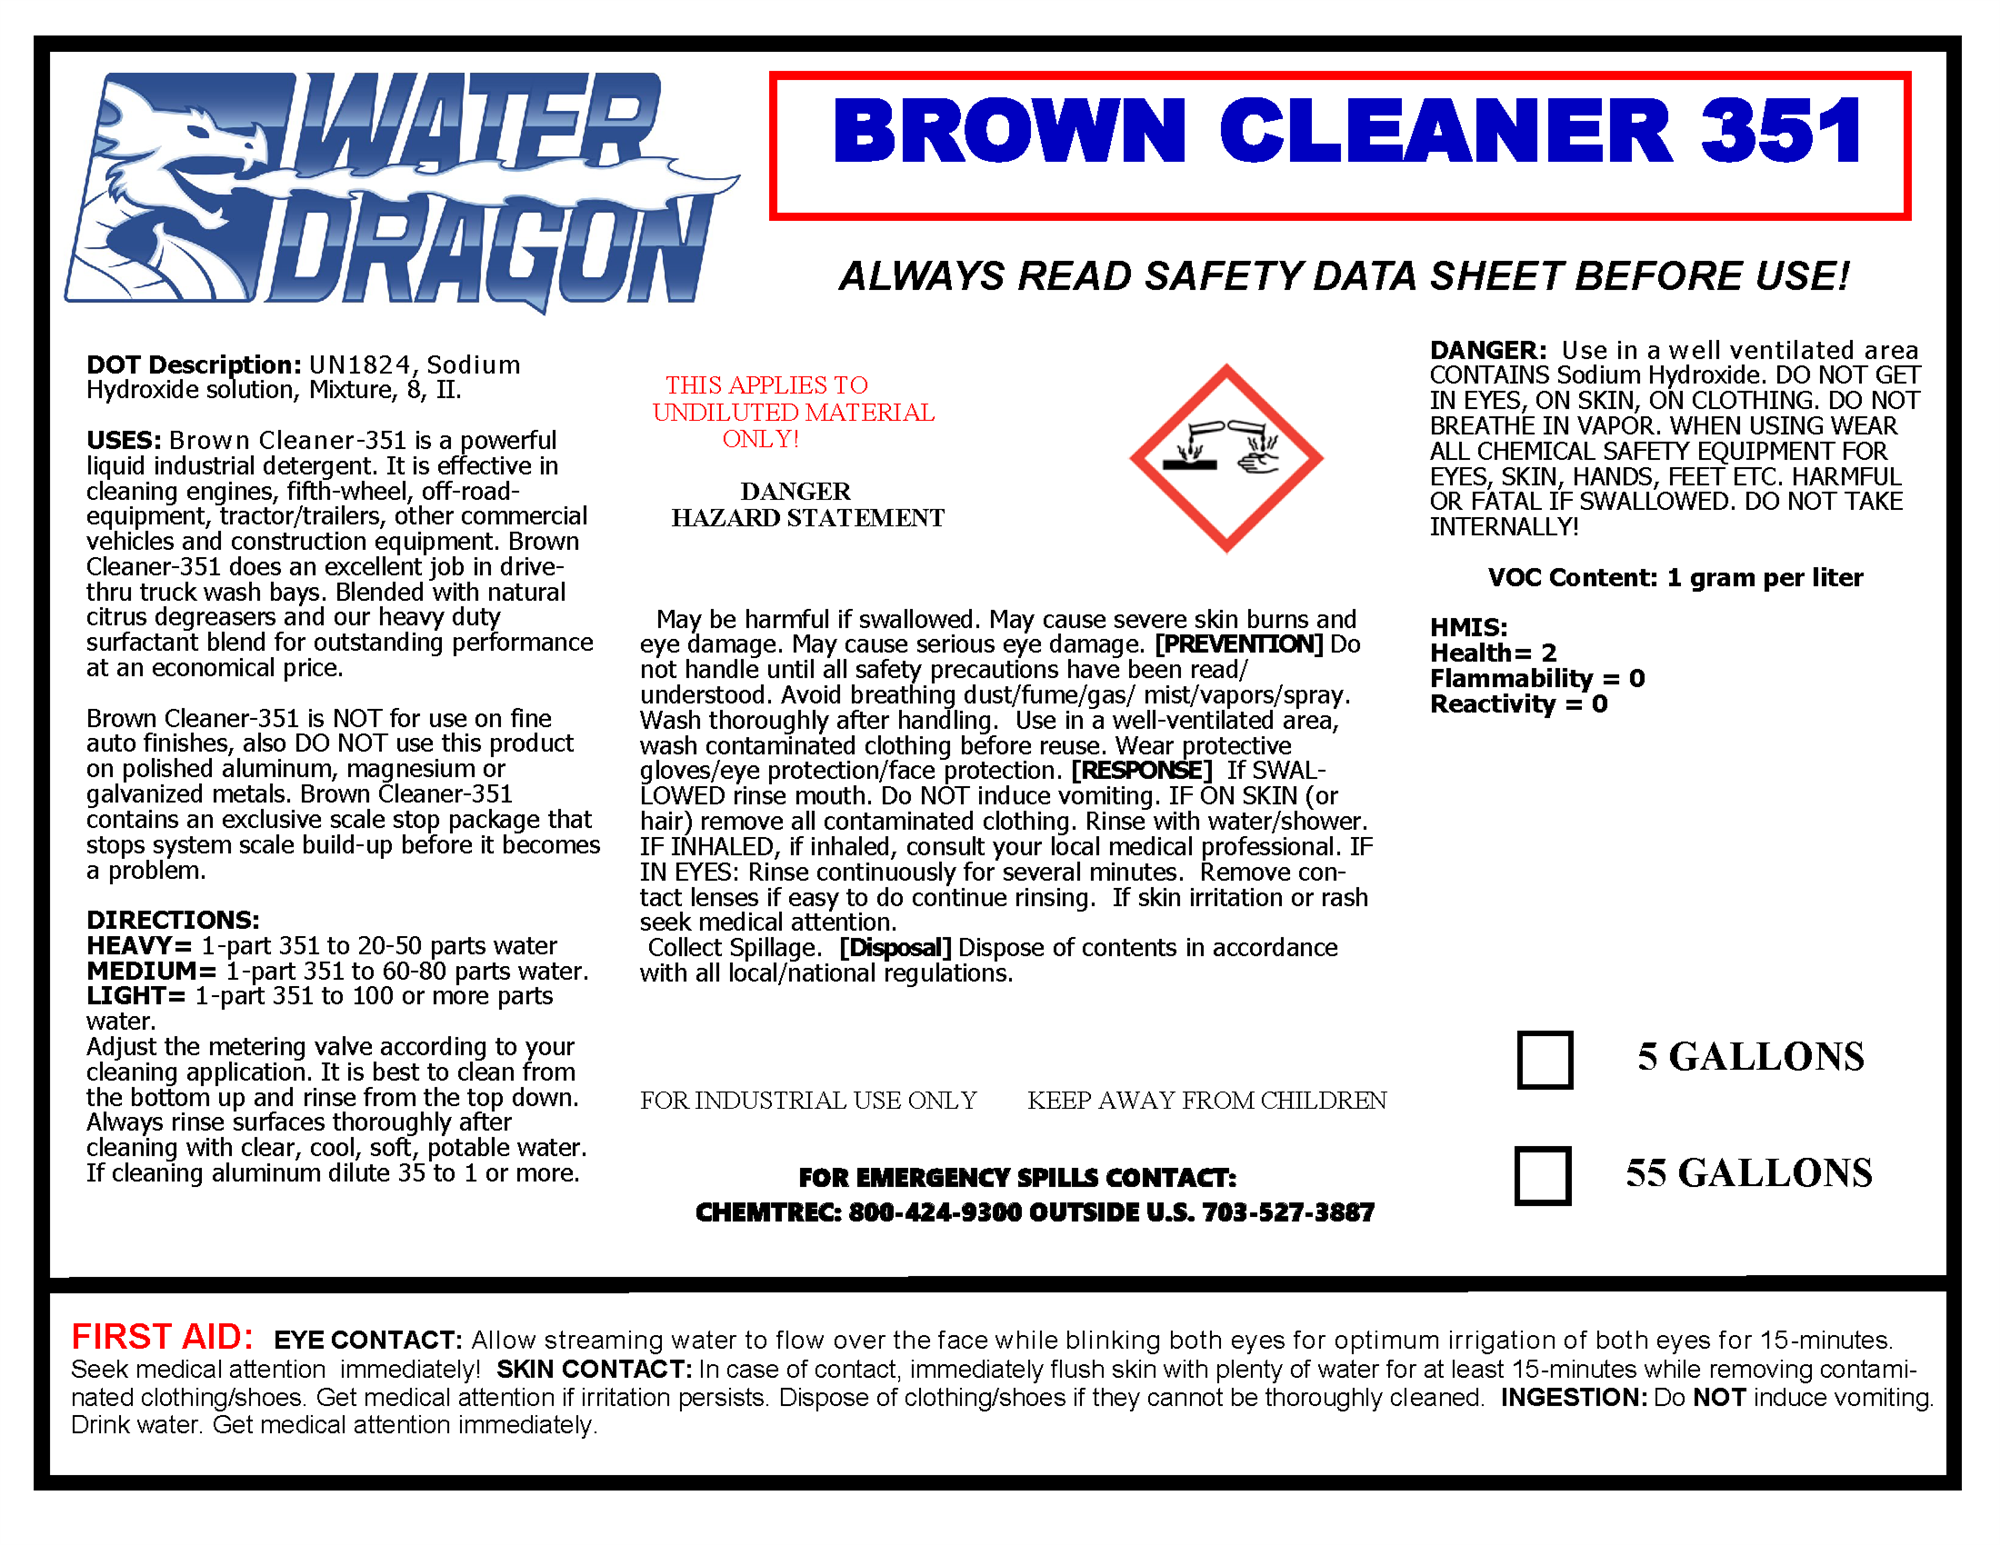 BROWN CLEANER 351- 55 GALLON DRUM